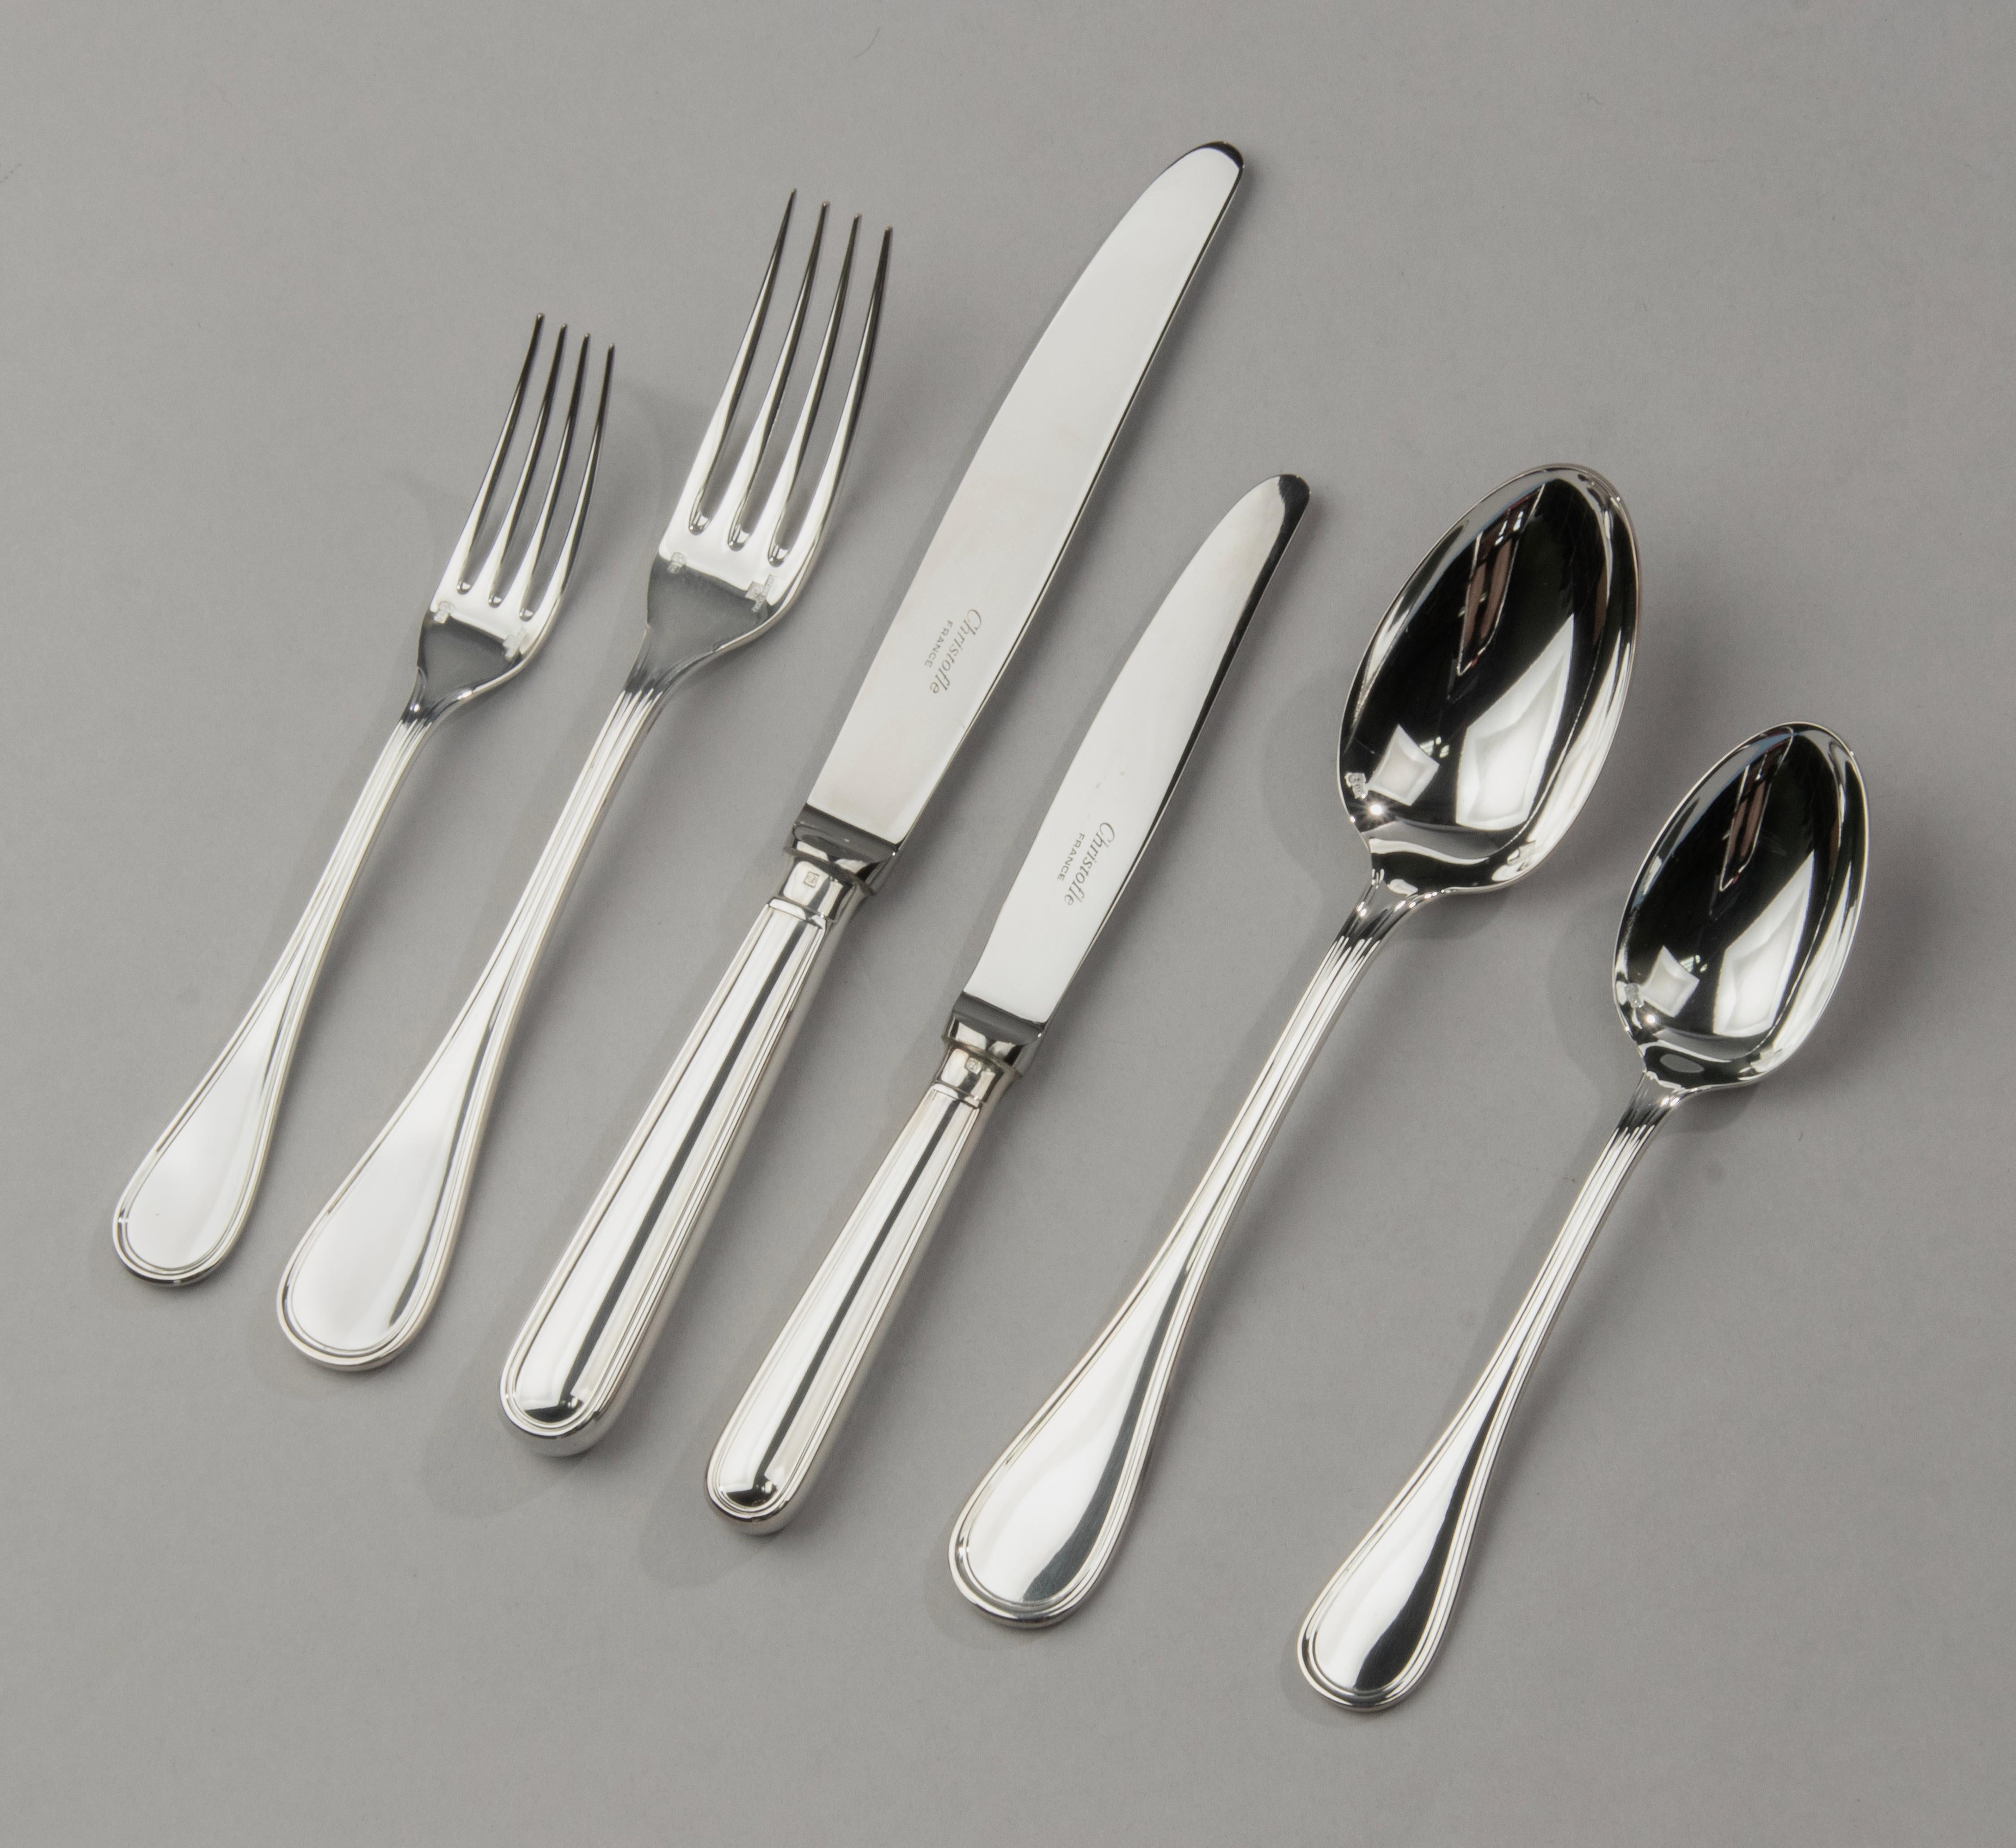 78-Piece Set Silver Plated Tableware for 12 Persons - Christofle model Albi 10